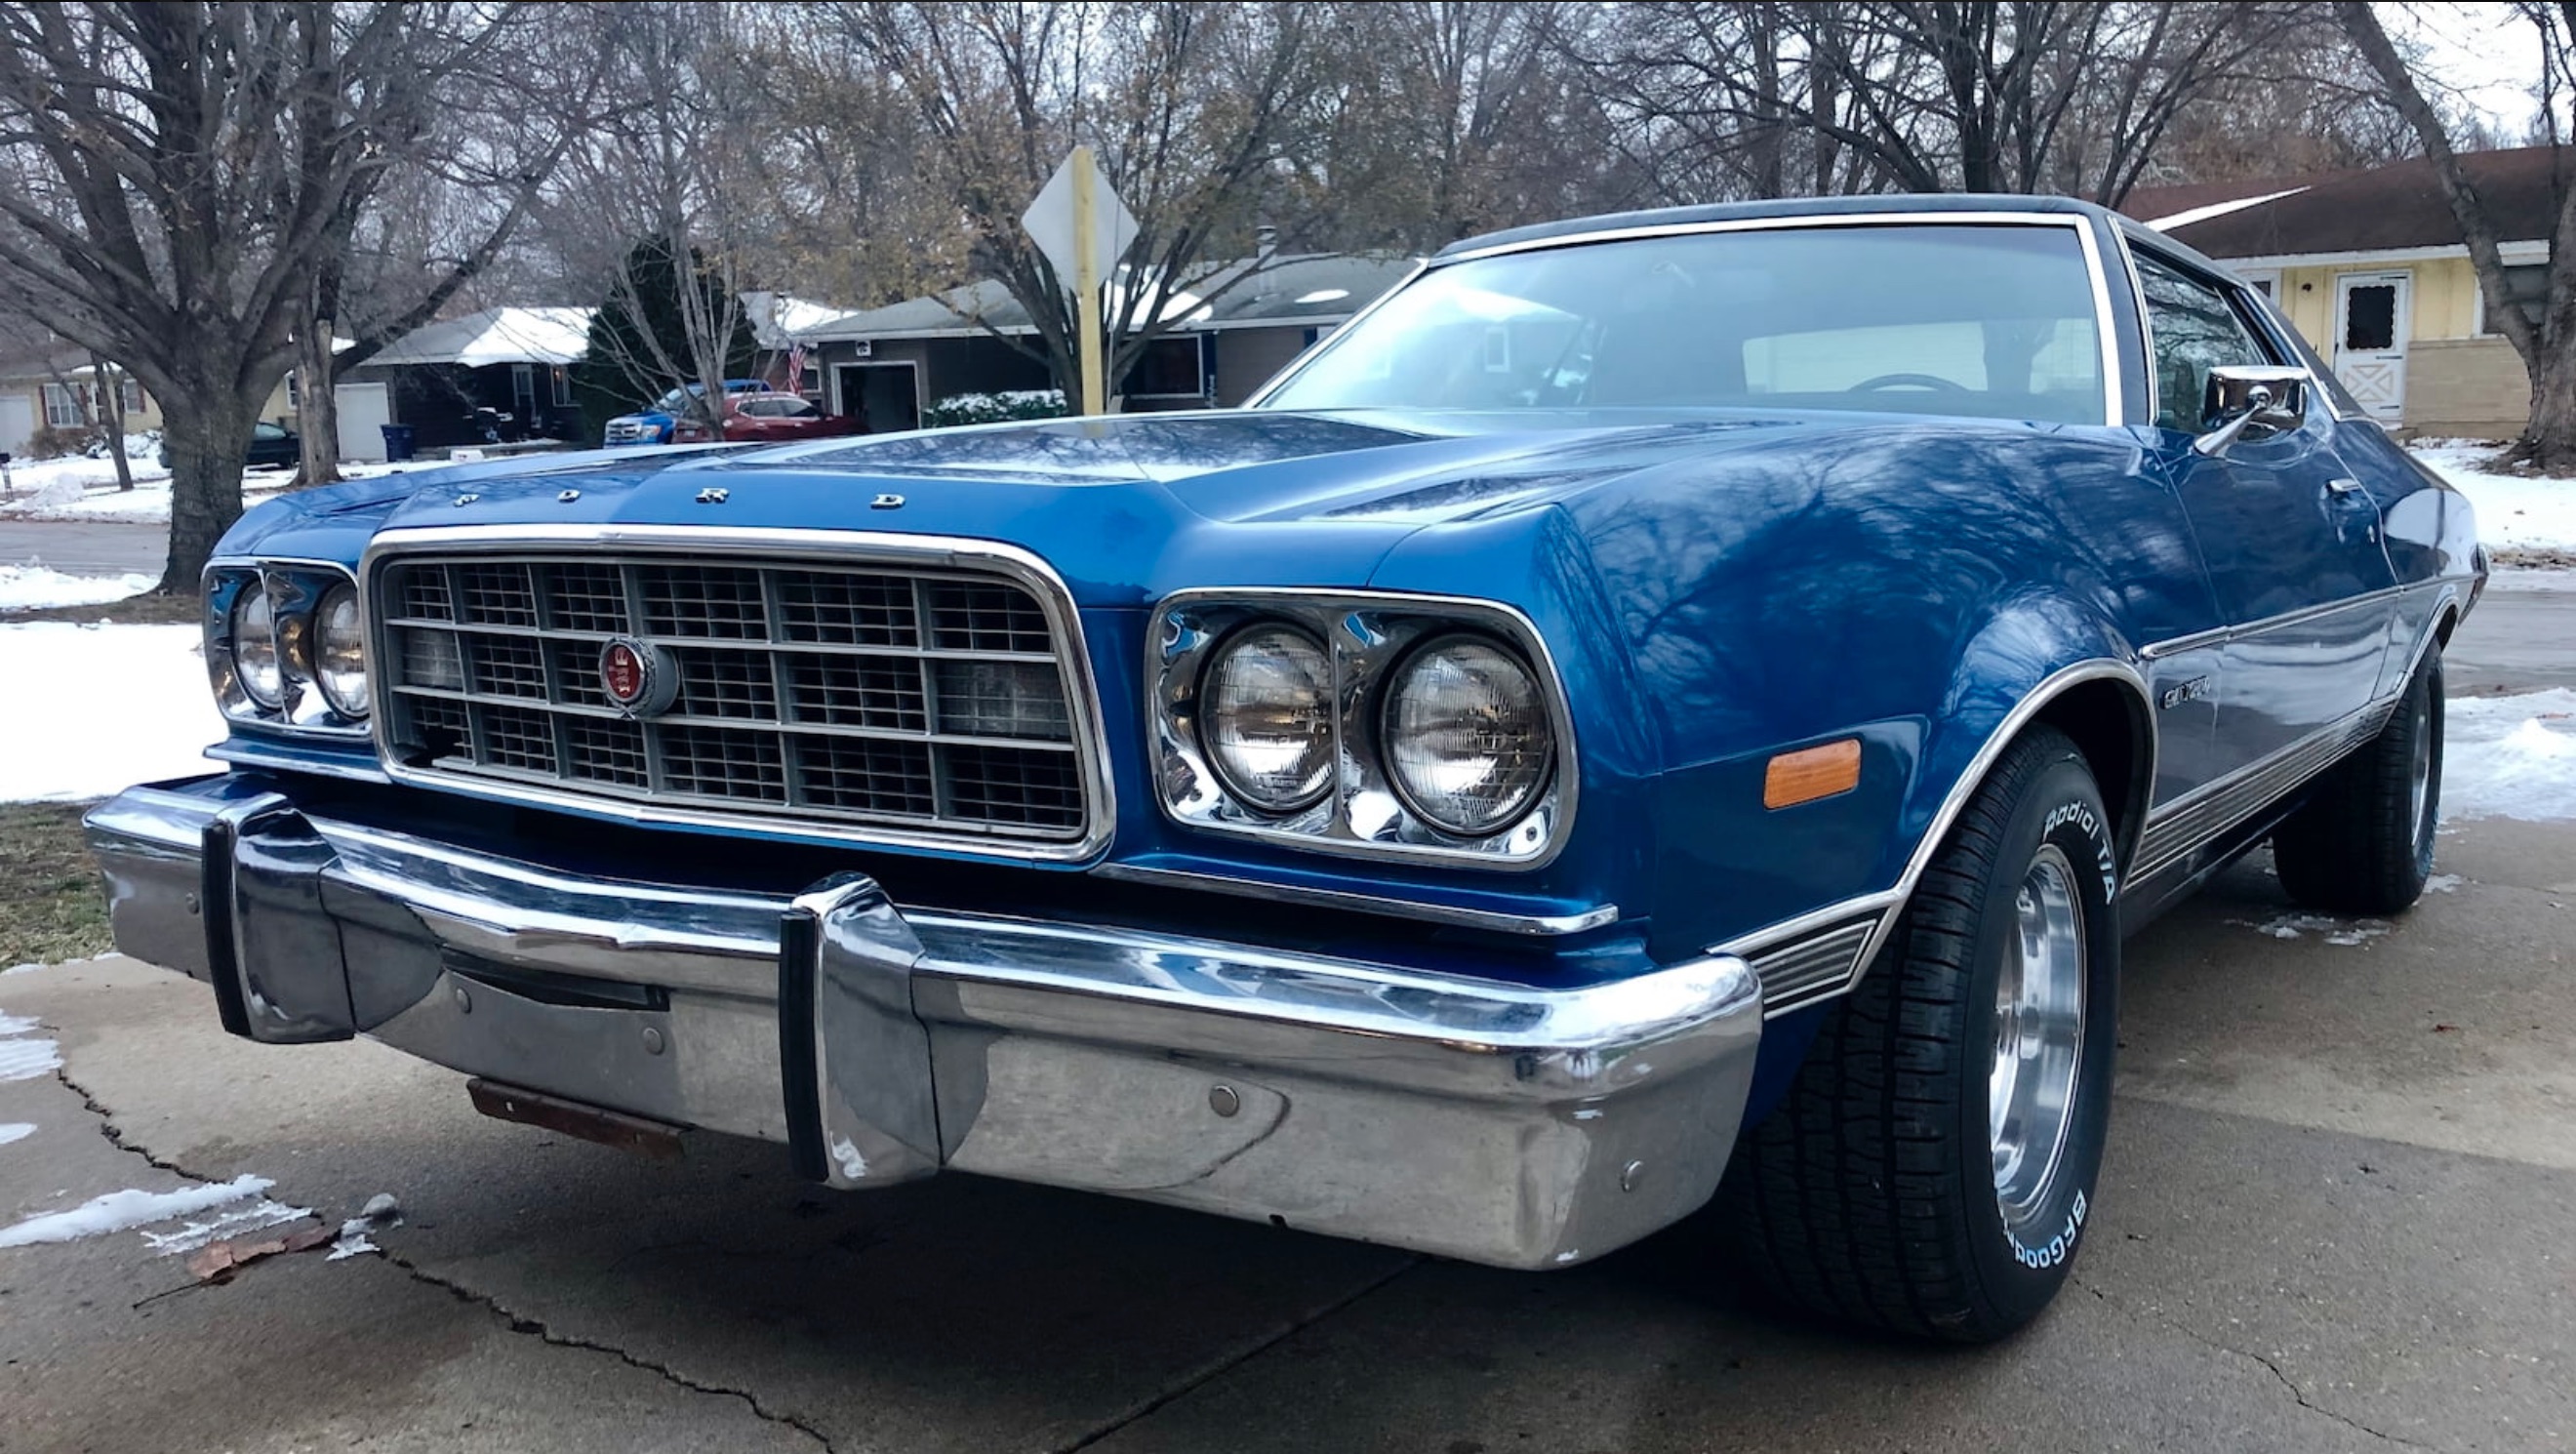  Monday Shopper: This 1973 Ford Gran Torino Brougham Is The  Right Car For The Right Ford Enthusiast 